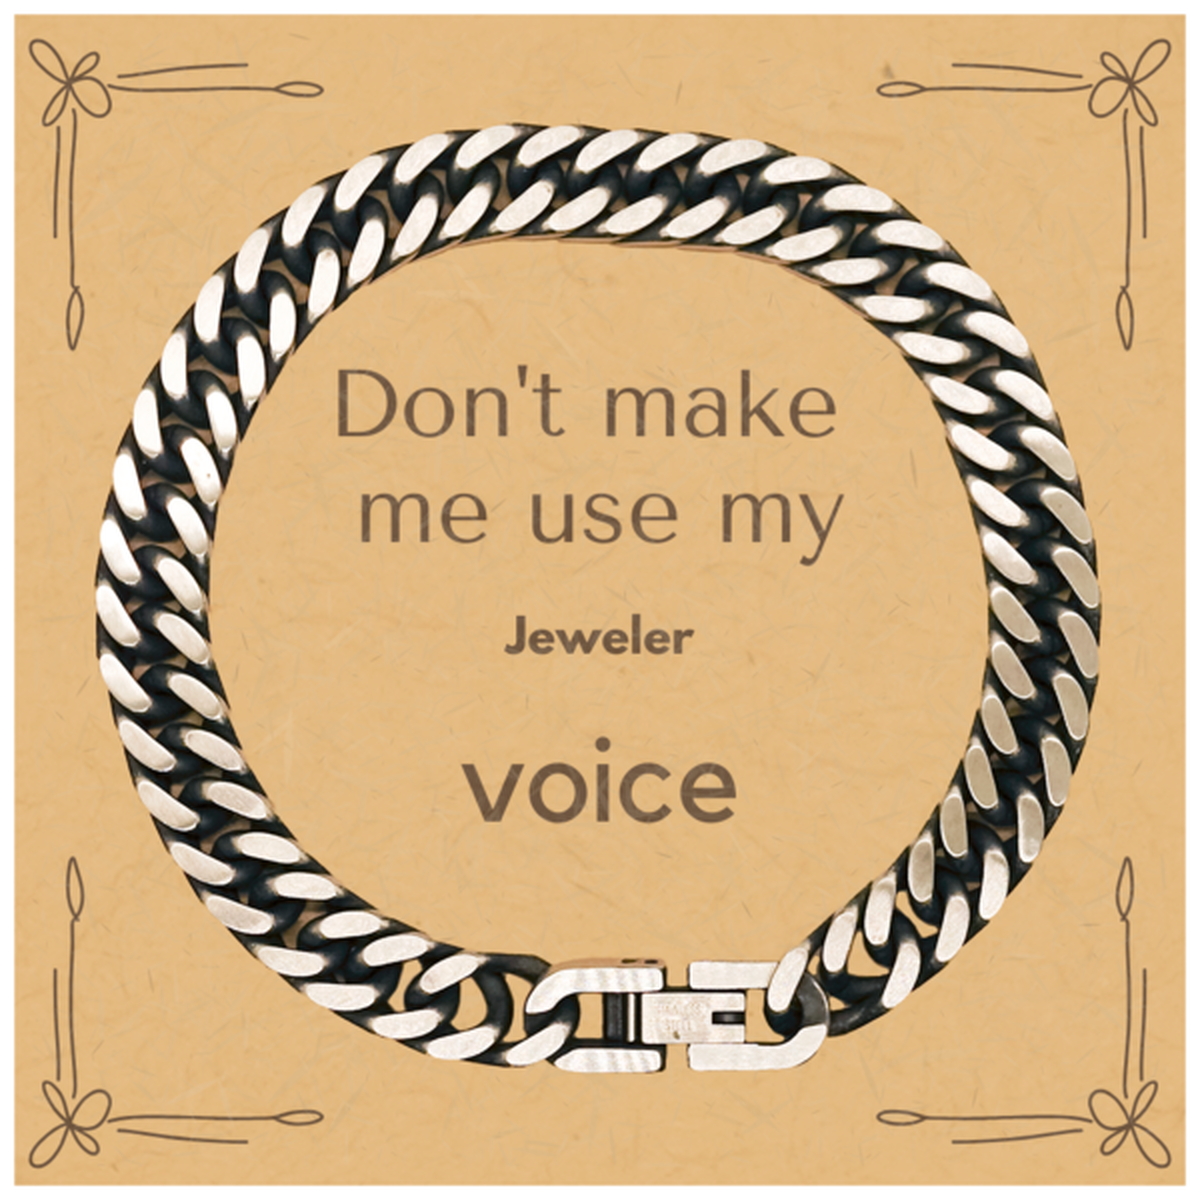 Don't make me use my Jeweler voice, Sarcasm Jeweler Card Gifts, Christmas Jeweler Cuban Link Chain Bracelet Birthday Unique Gifts For Jeweler Coworkers, Men, Women, Colleague, Friends